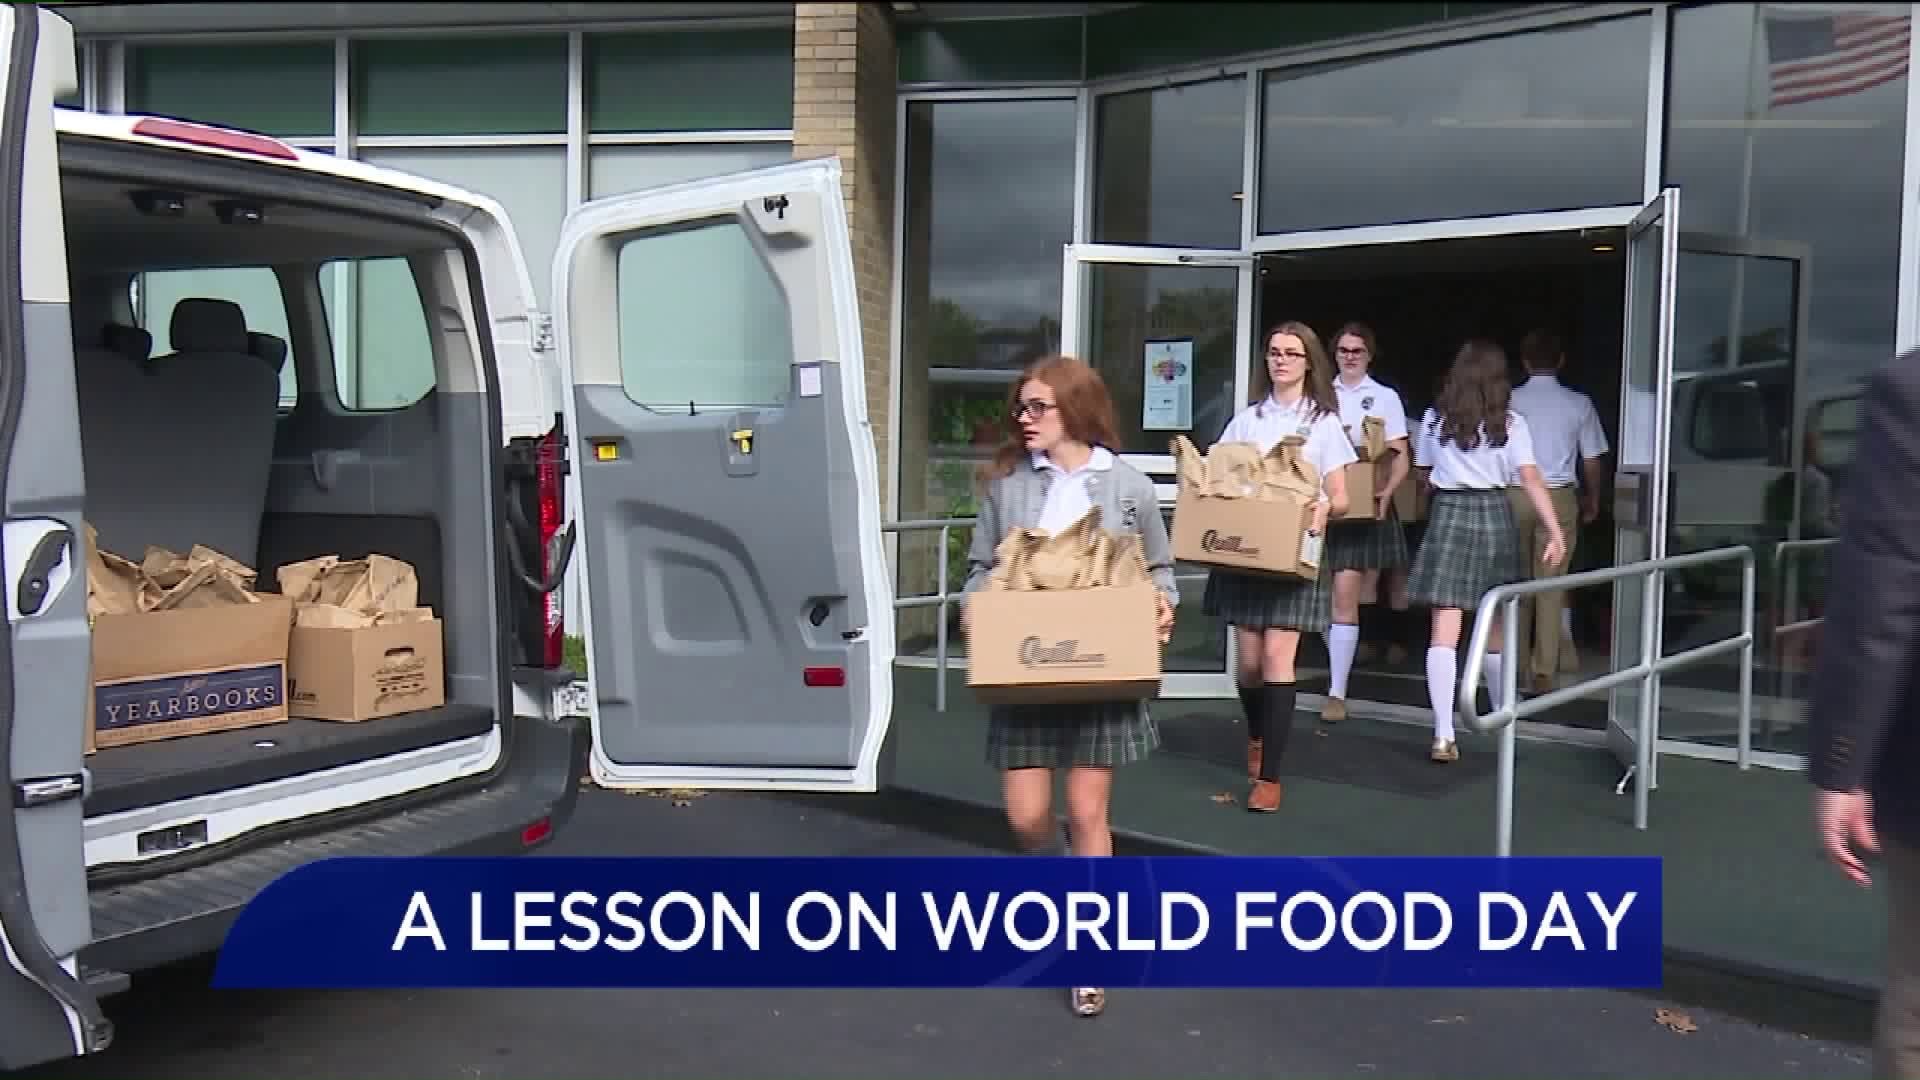 Holy Cross High School Gives Out 200 Meals on World Food Day